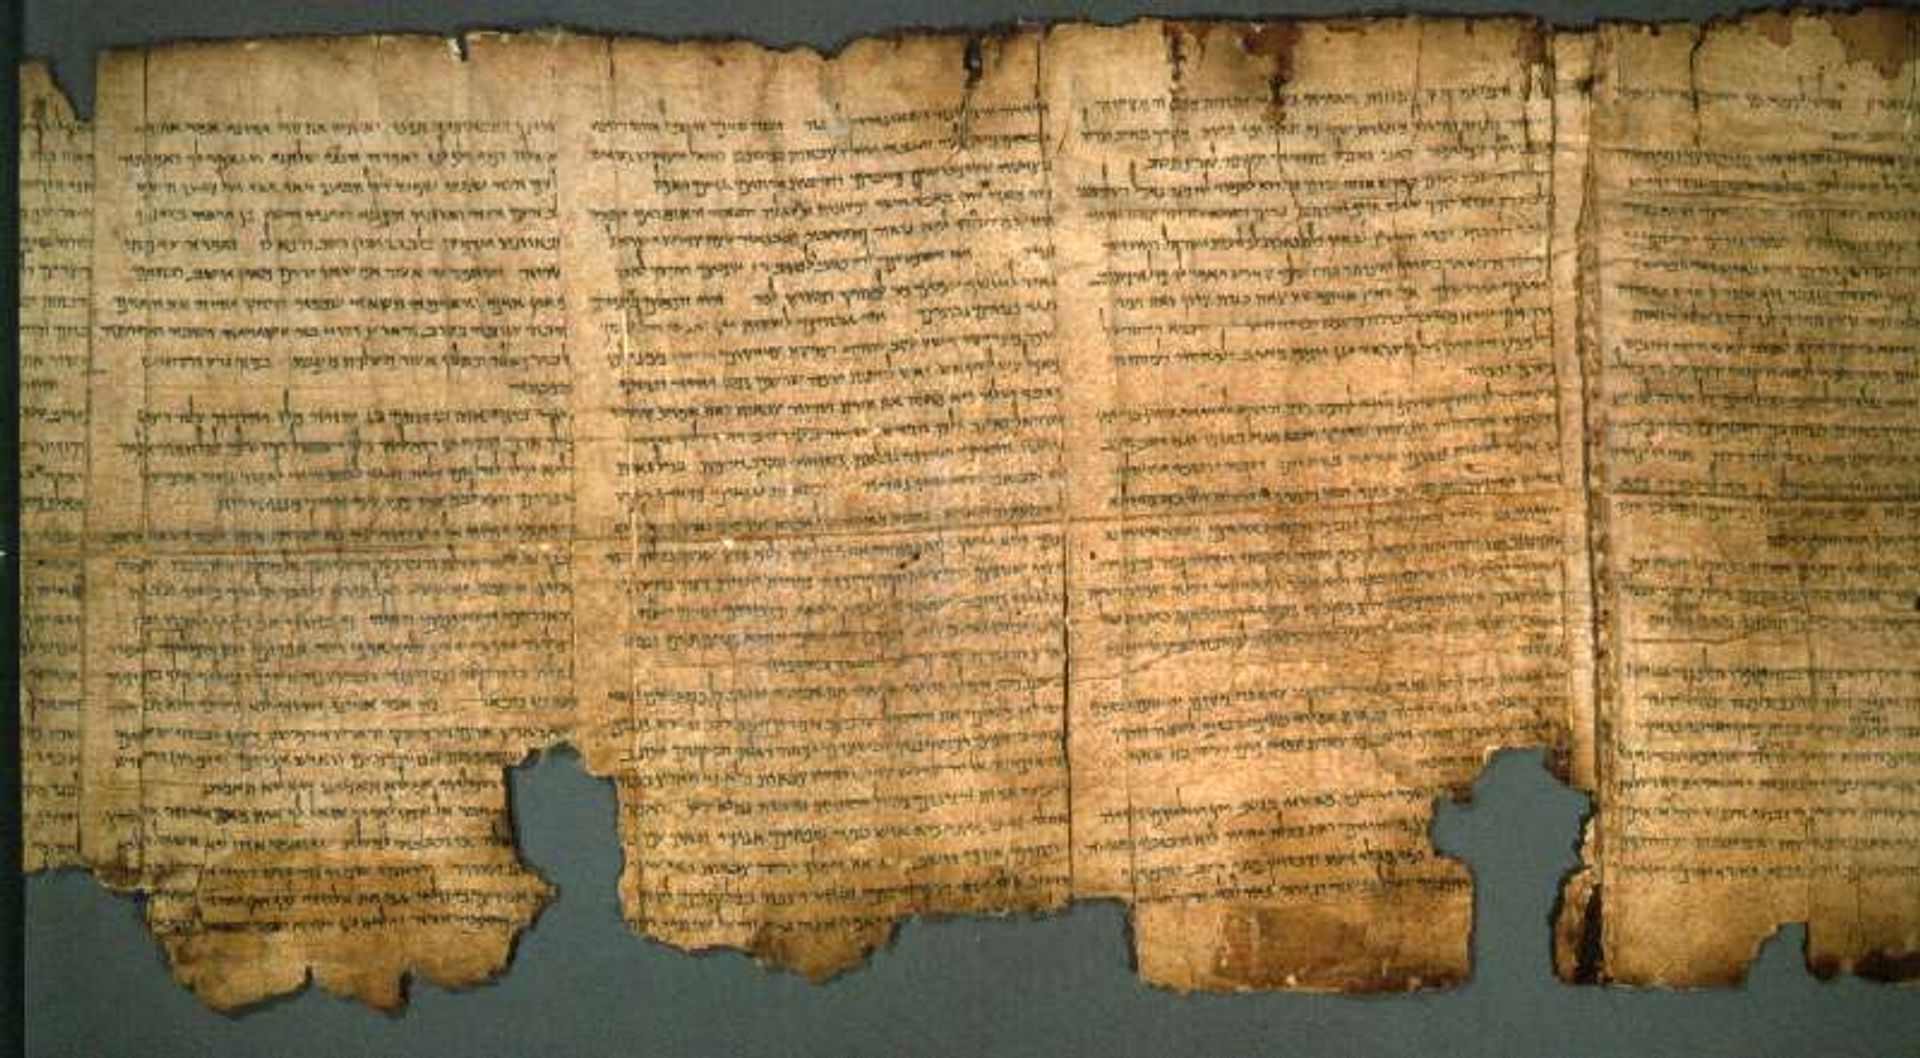 The Great Isaiah Scroll, now housed in the Israel Museum Photo © Israel Museum, Jerusalem, by David Harris